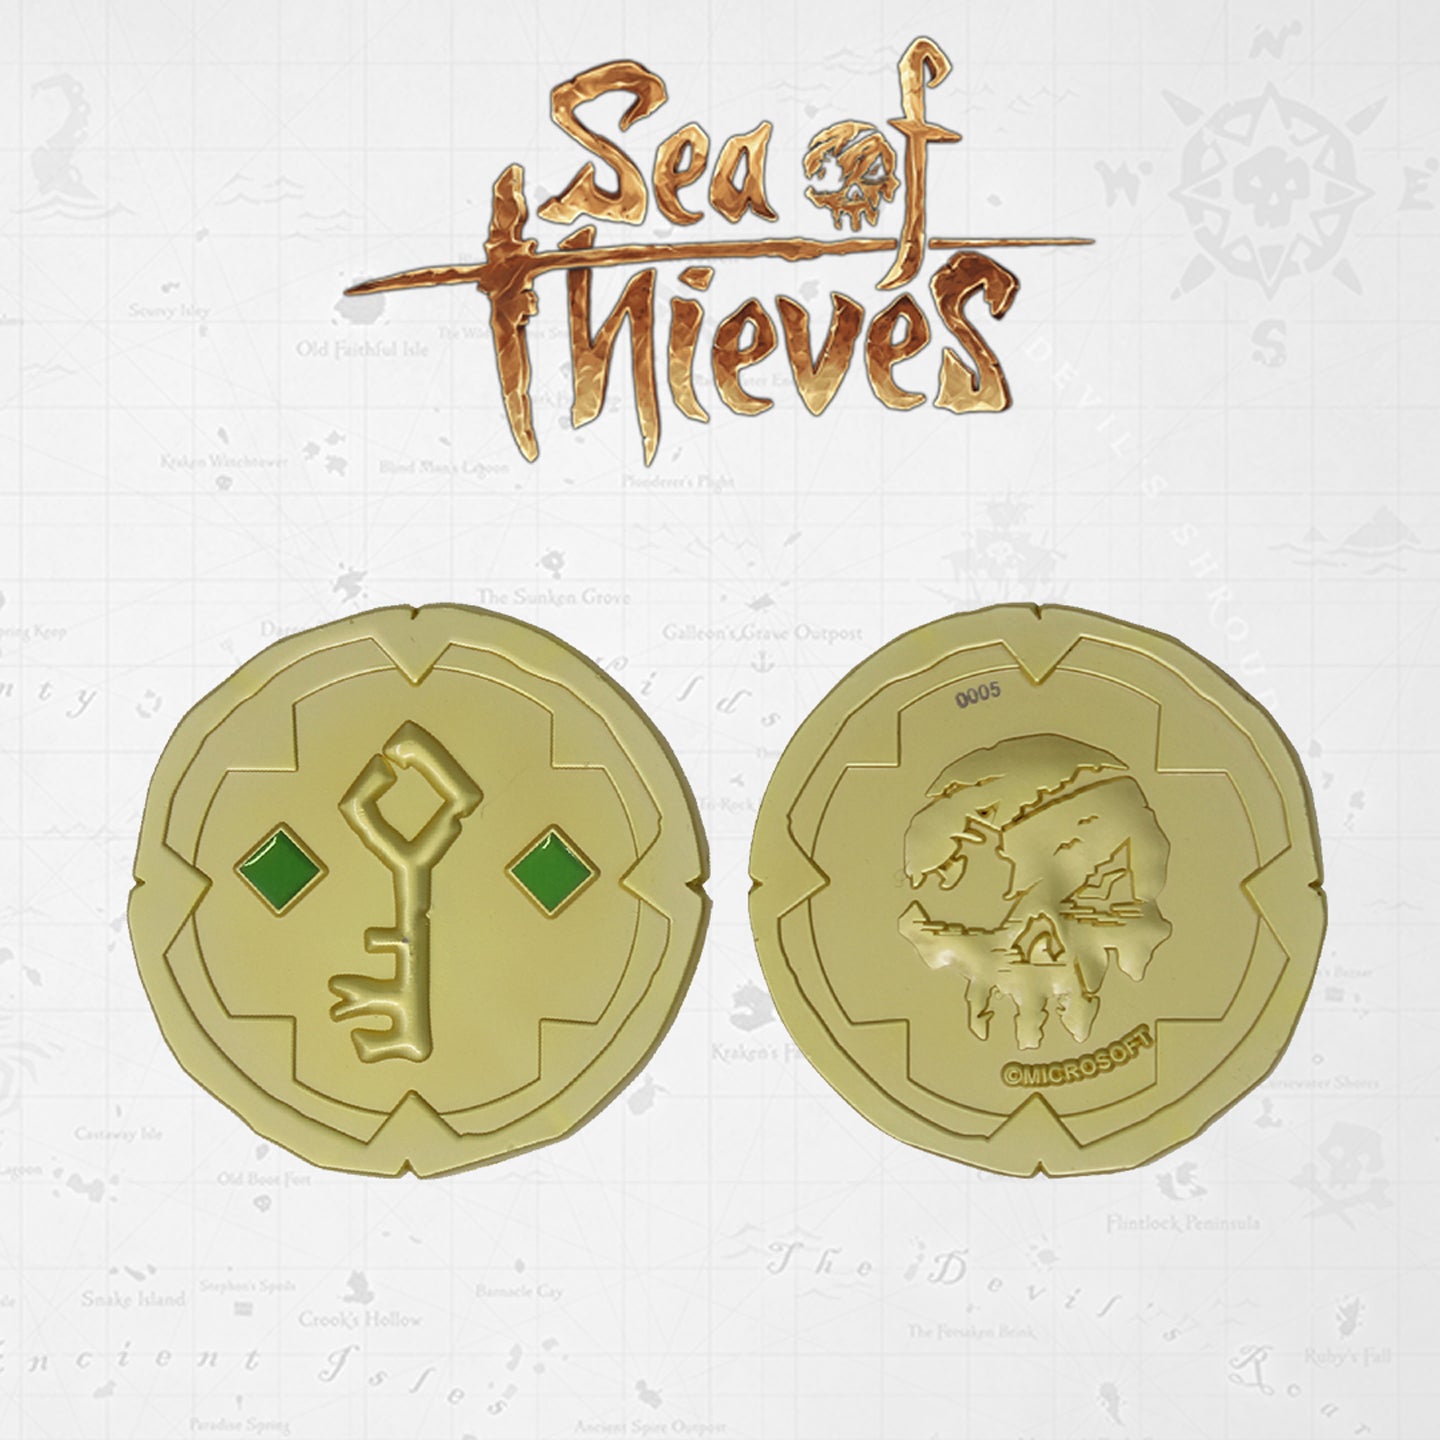 Sea of Thieves Limited Edition Replica Gold Hoarders Key Collectible Coin